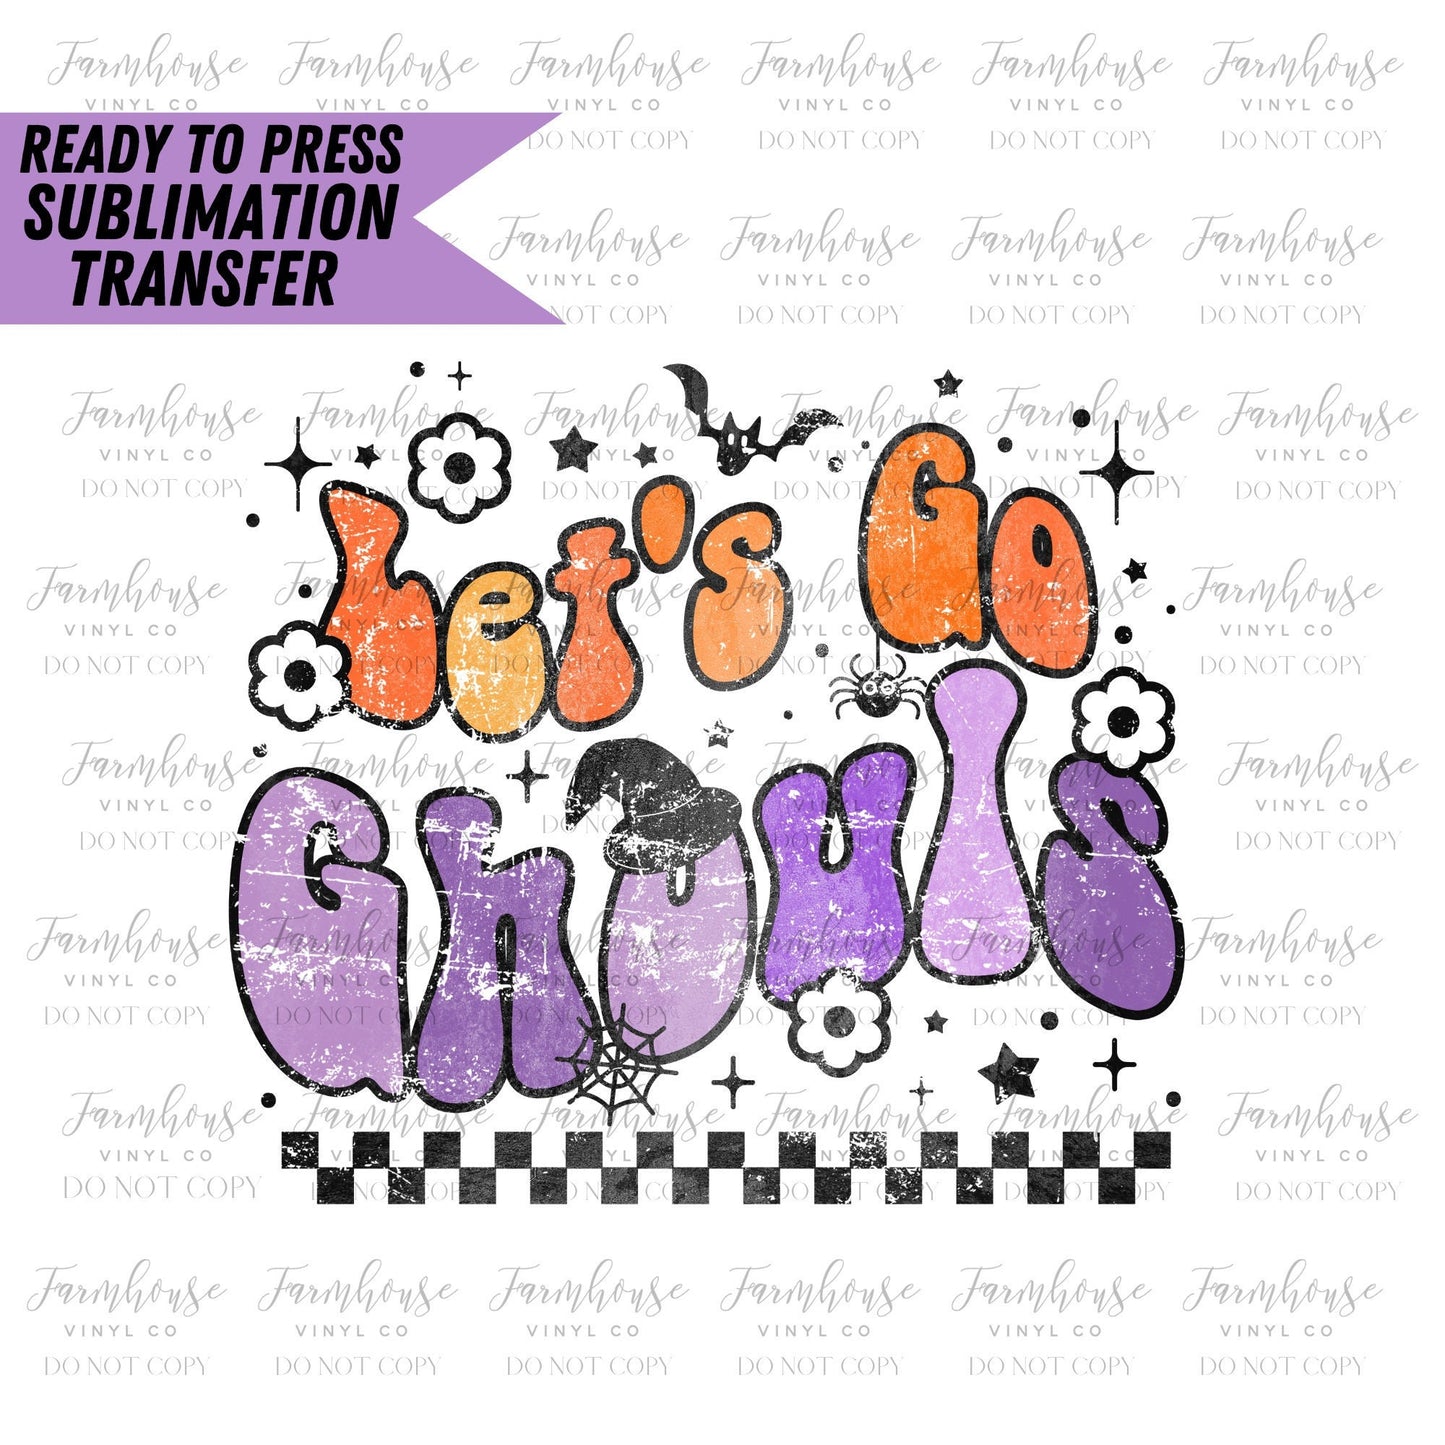 Let's Go Ghouls Retro, Ready to Press Sublimation Transfer, Heat Transfer, Trending Graphic 22-23, Kids Halloween Design, Floral Fall Retro